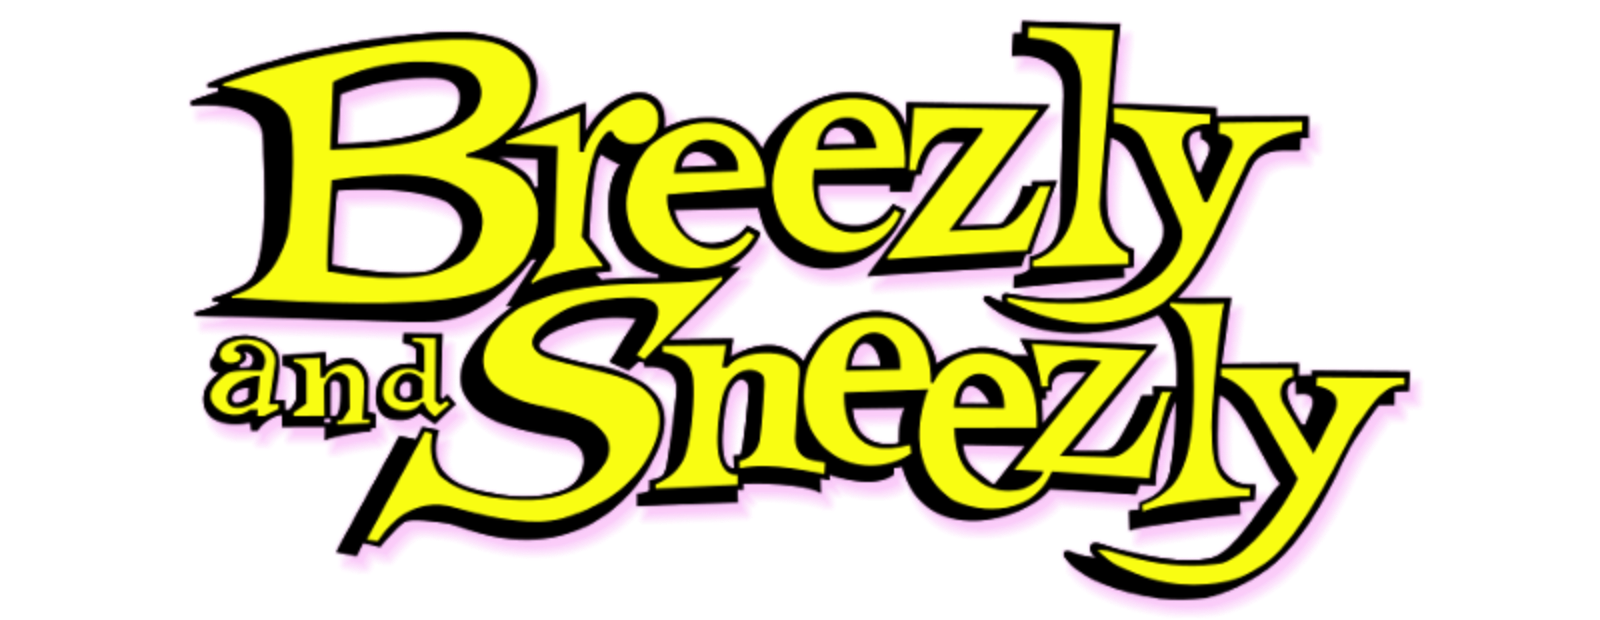 Breezly and Sneezly 